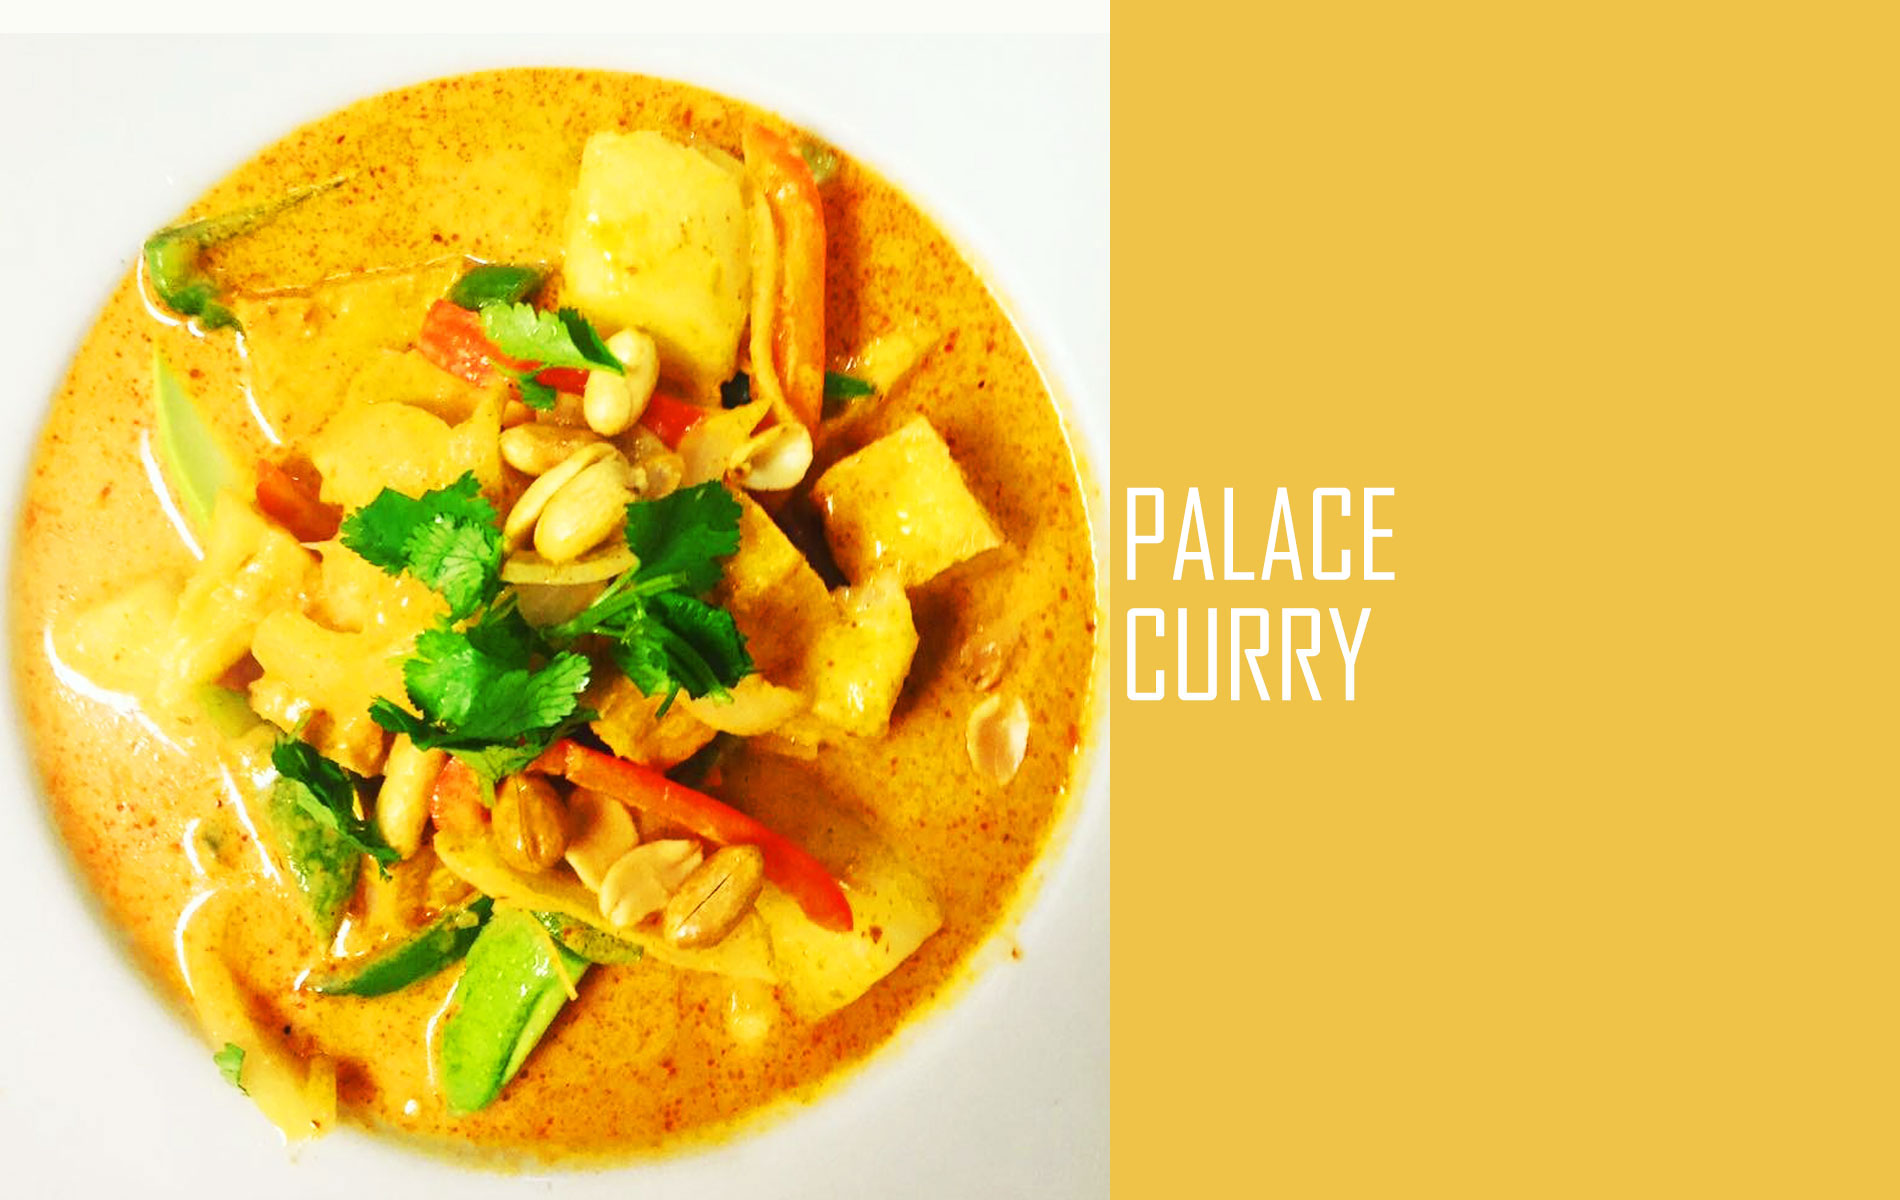 Palace Curry